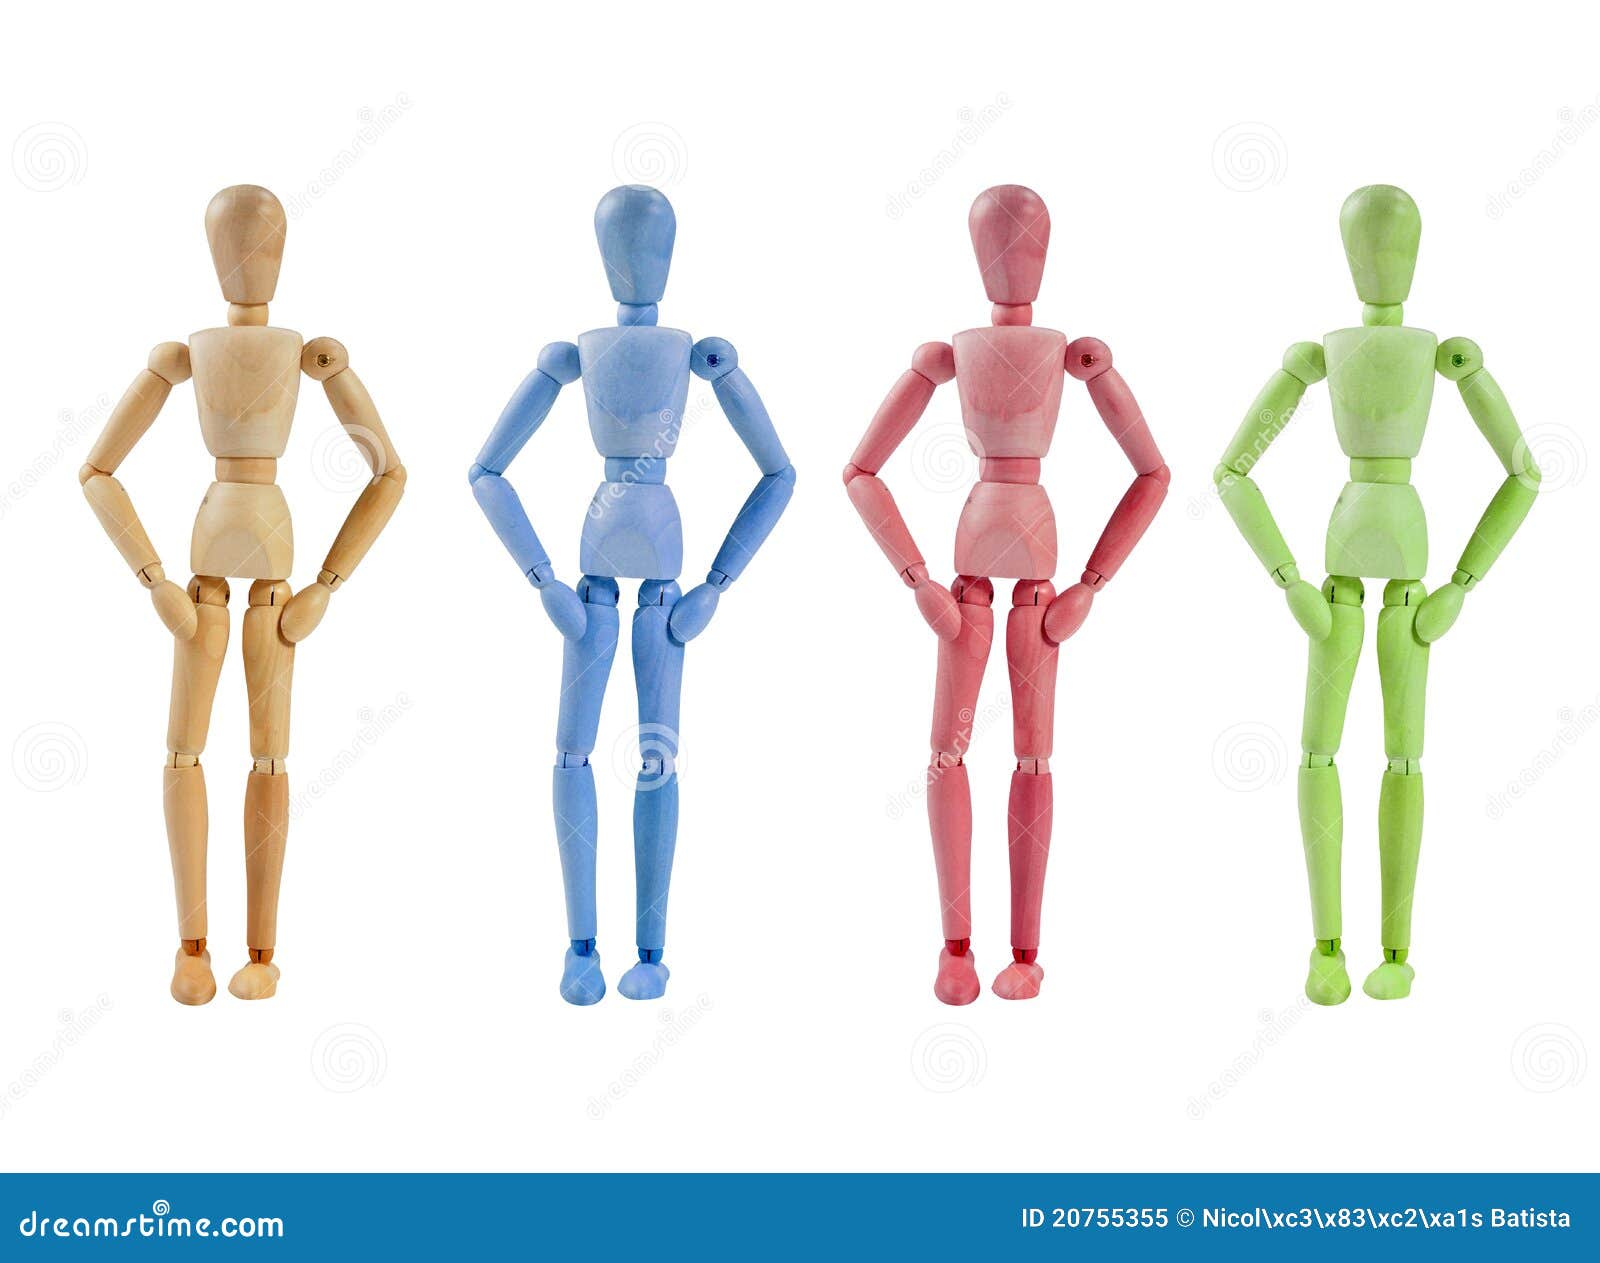 collection of artist mannequin in various colors